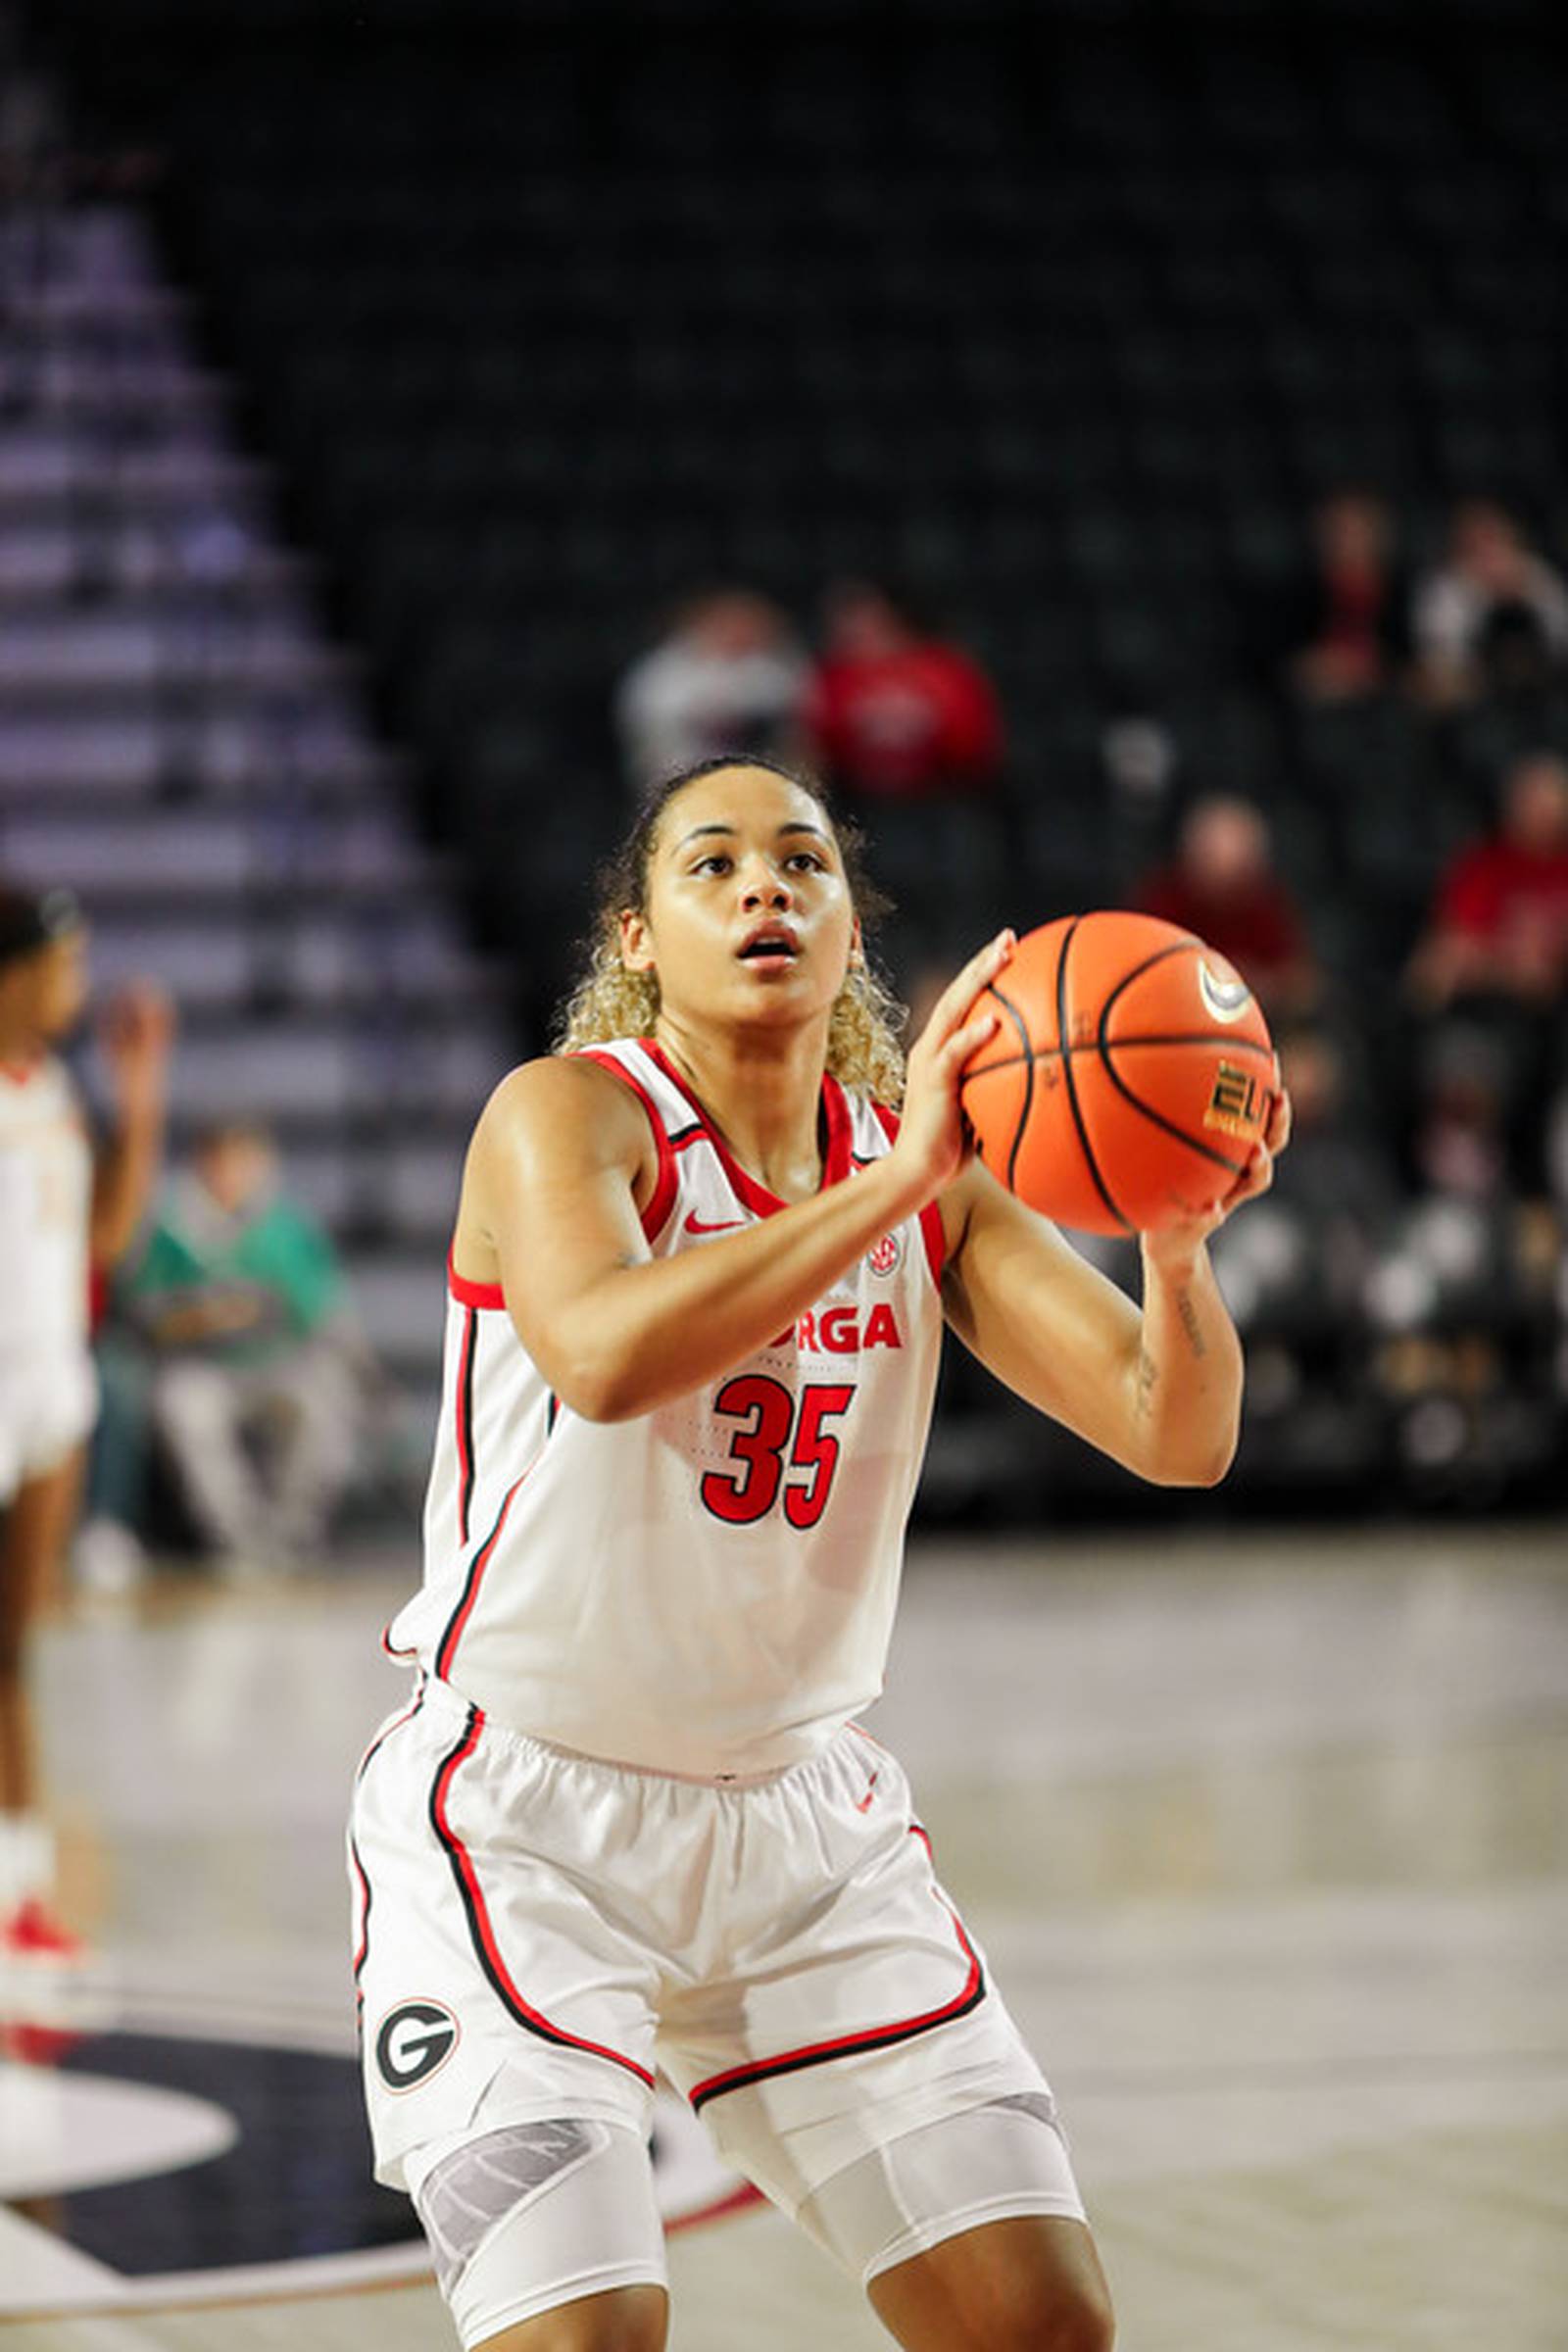 UGA Women’s Basketball improves to 20 with win over 960 The Ref